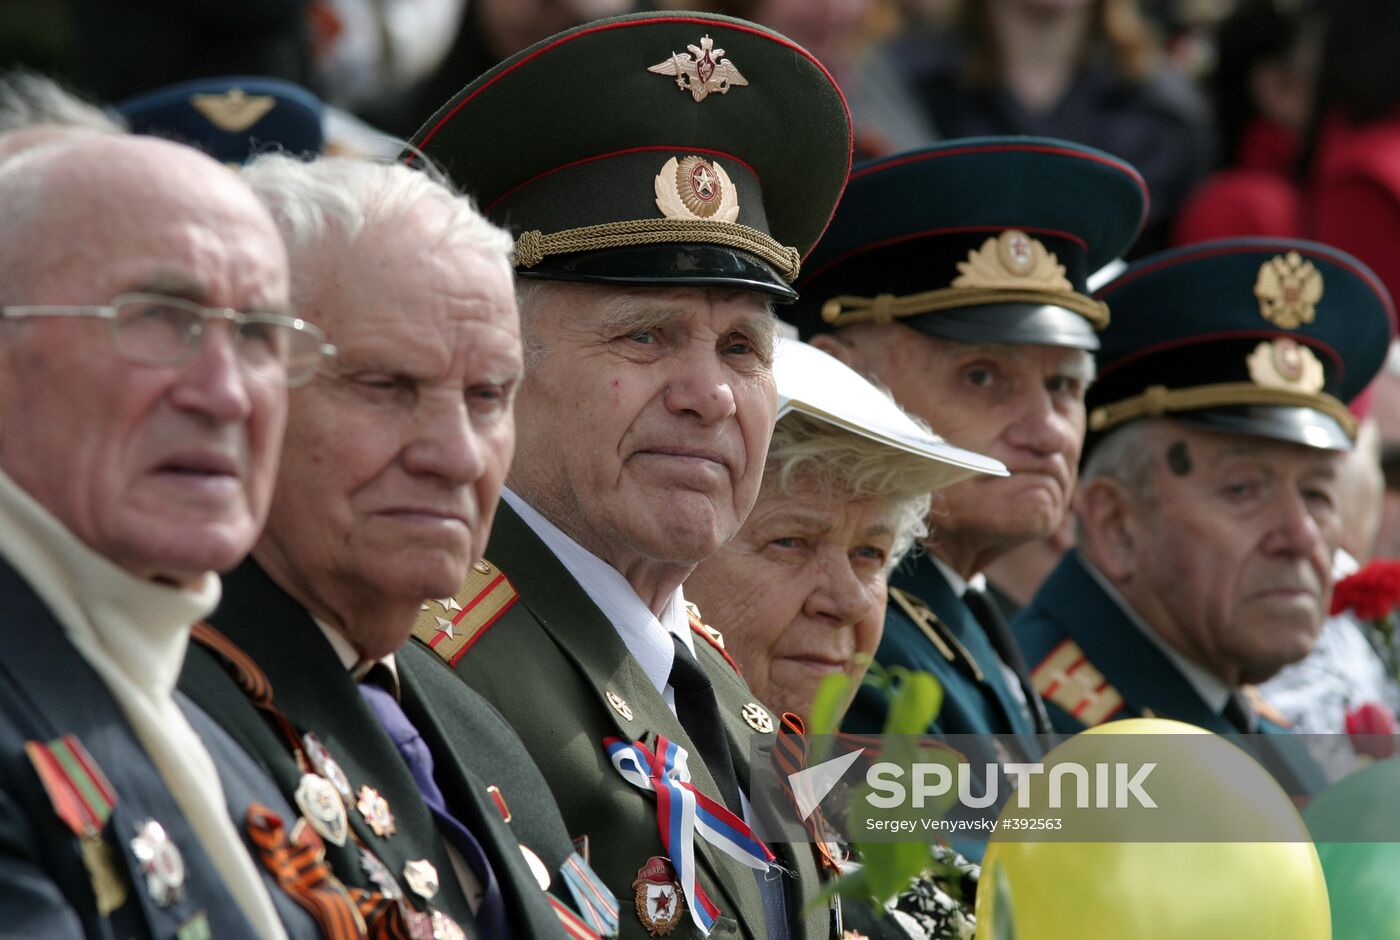 Victory Day festivities in Rostov-on-Don